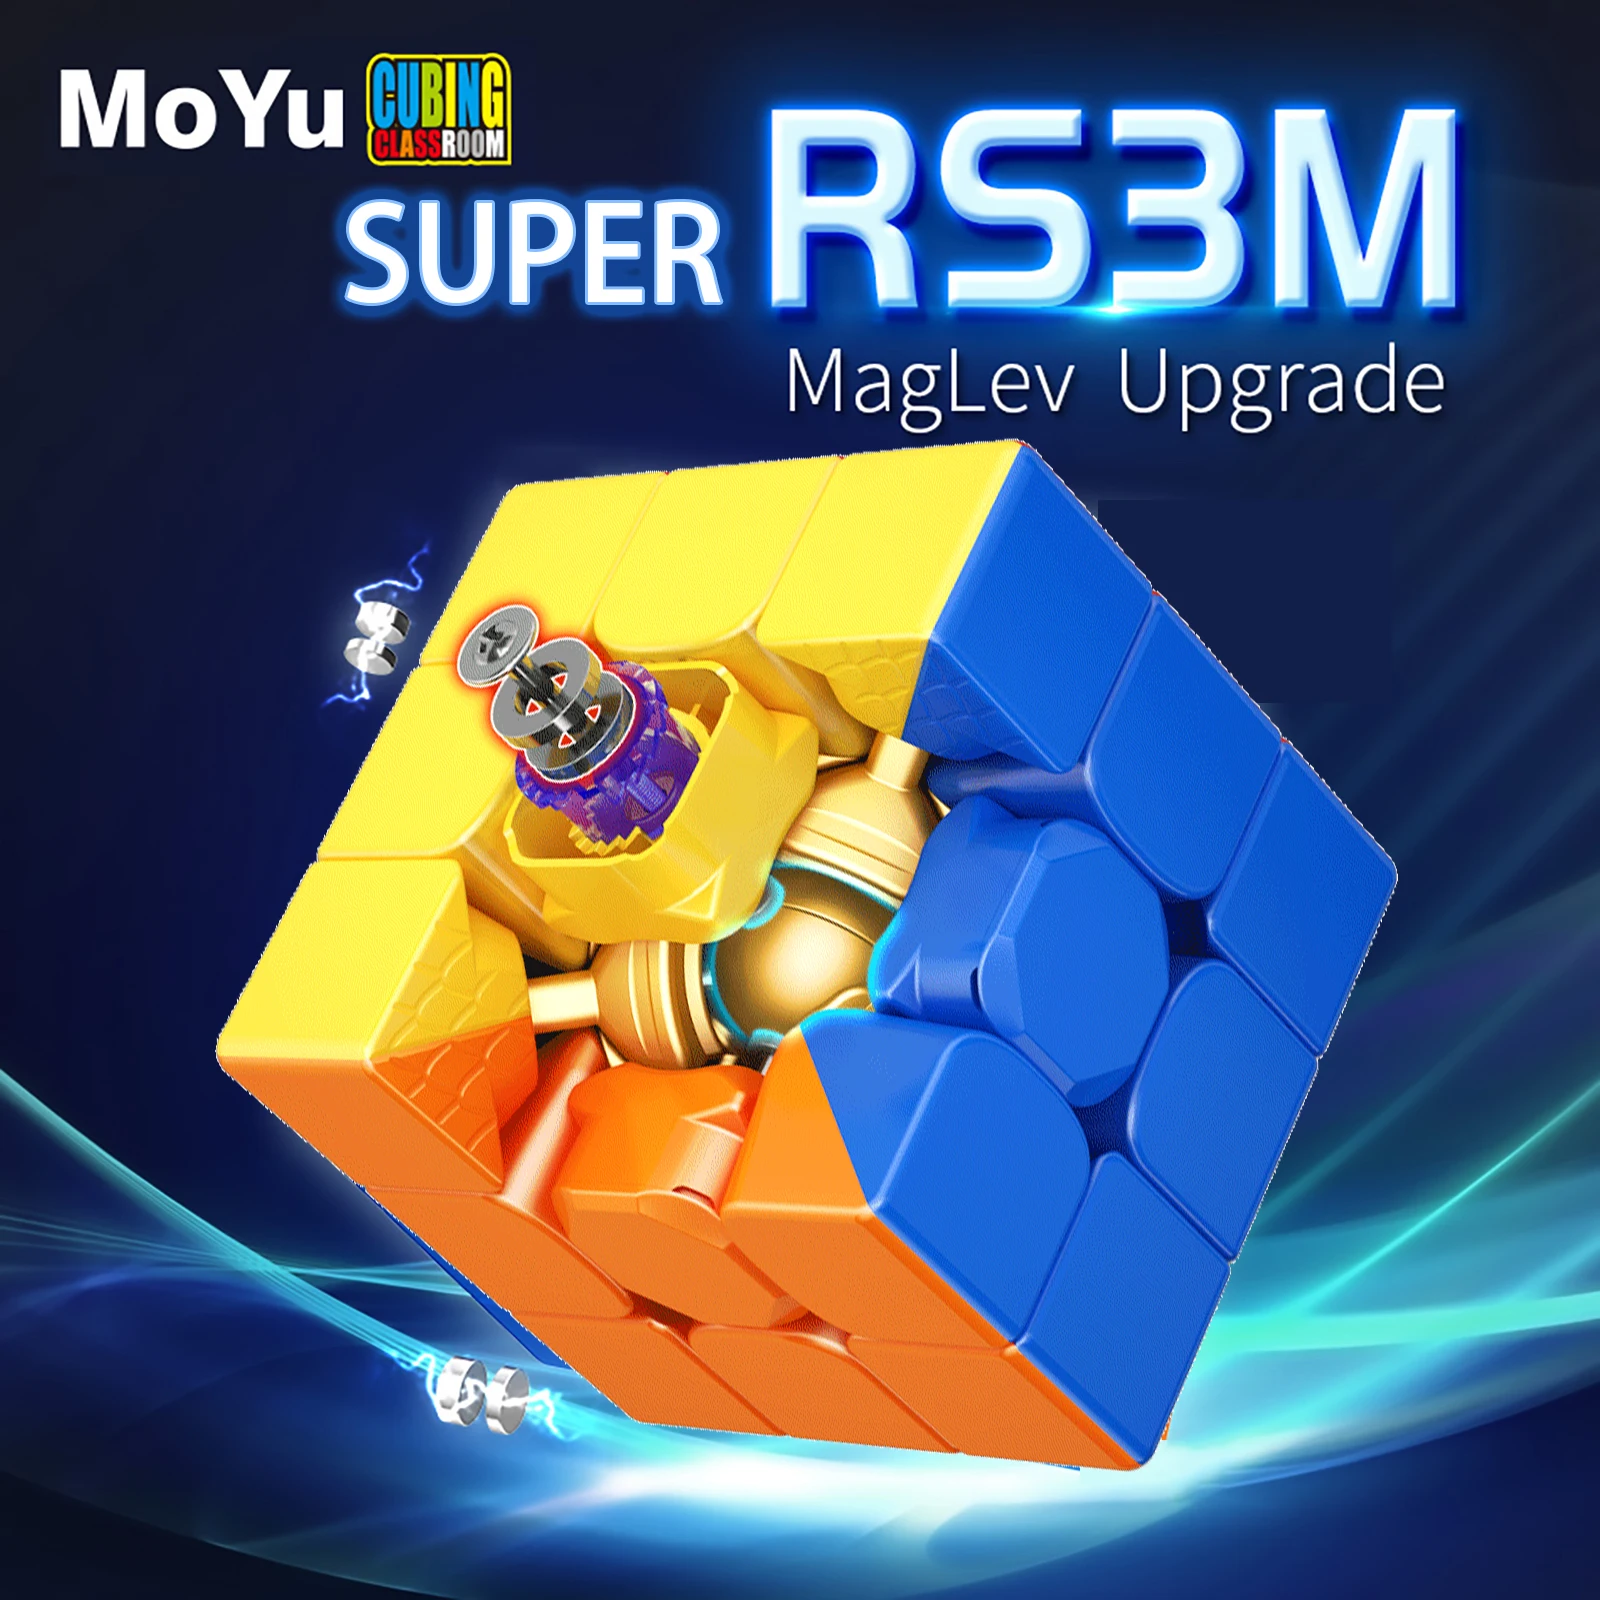 [moyu rs3m series] super rs3m2020 magnetic pyramid cube colorful speed fidget puzzle toy for kids MoYu 3x3 Super RS3M Maglev Magic Cube 3x3 Magnetic Cubo Magico MEILONG3 Professional Speed Puzzle Children's Fidget Toys